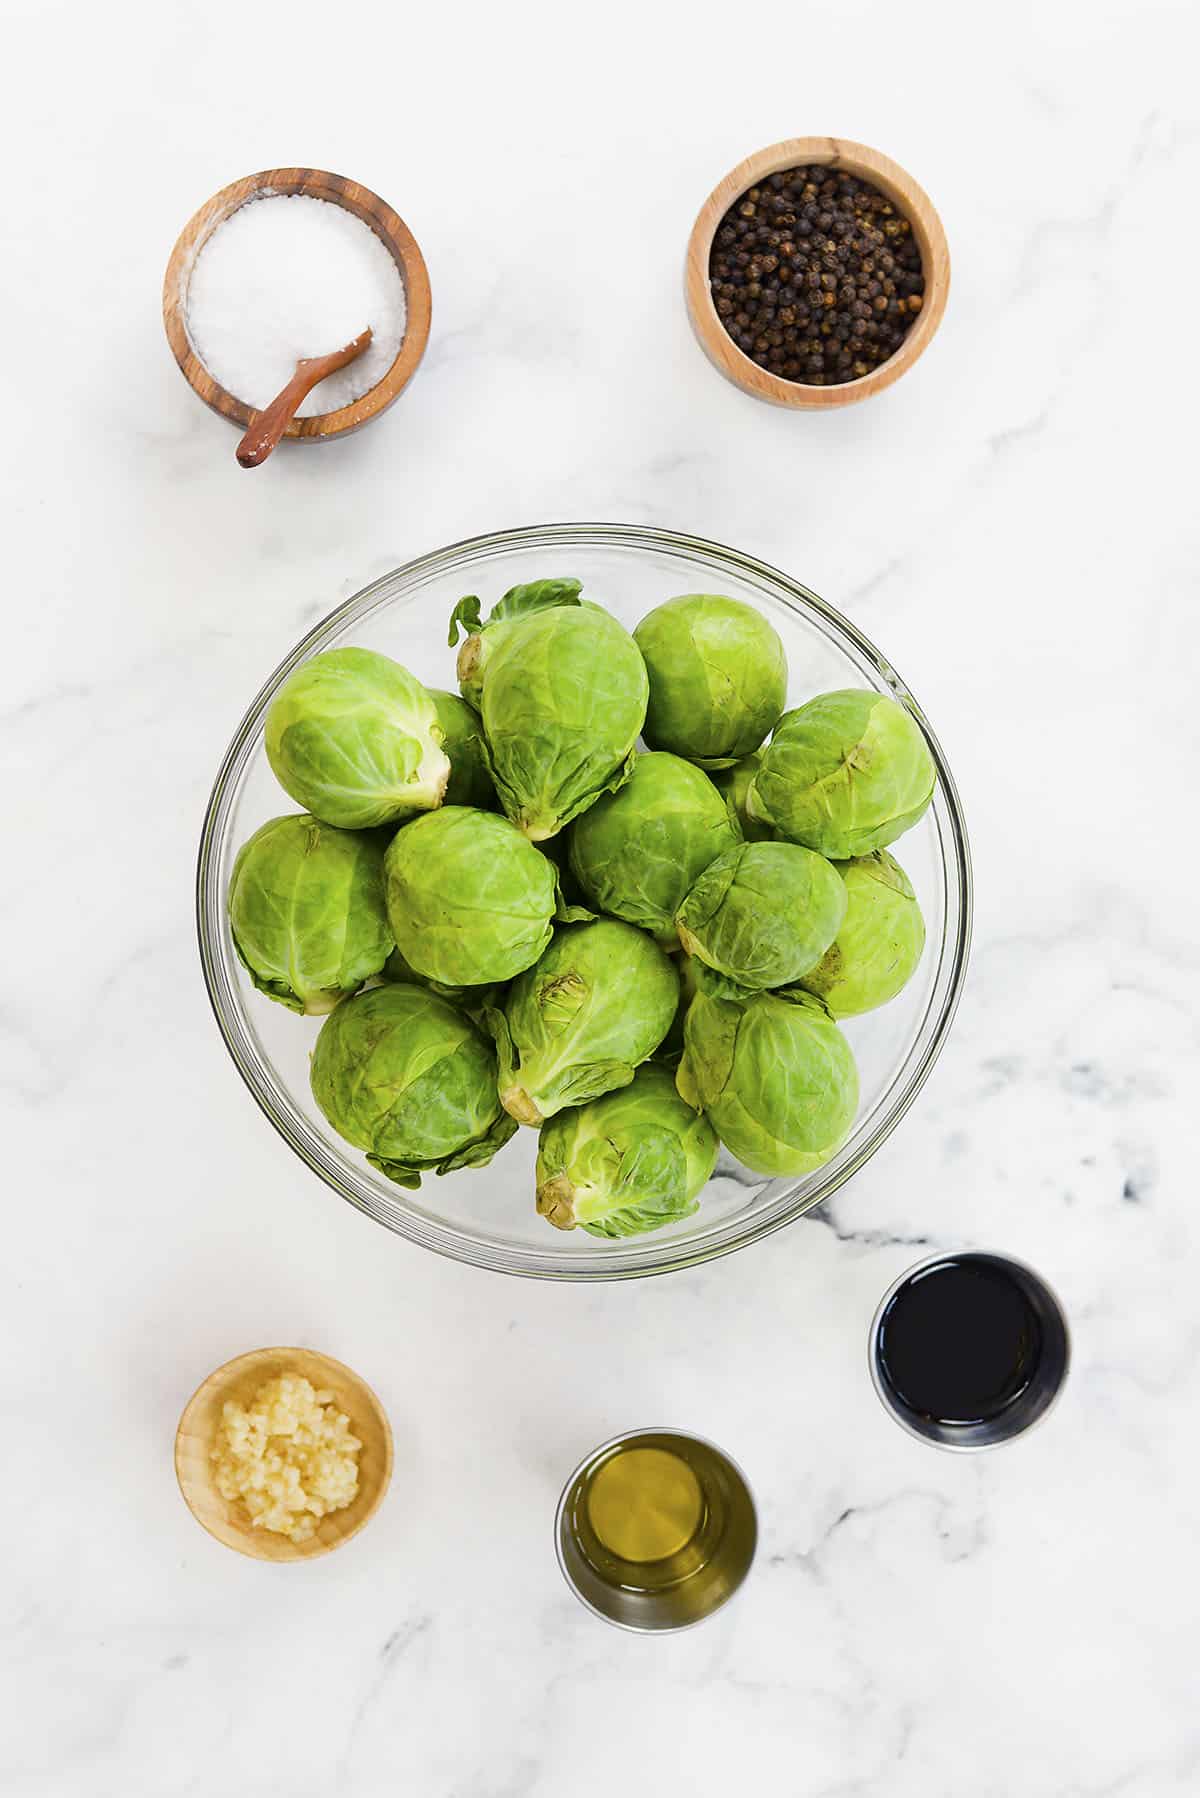 Ingredients for roasted balsamic brussel sprouts.